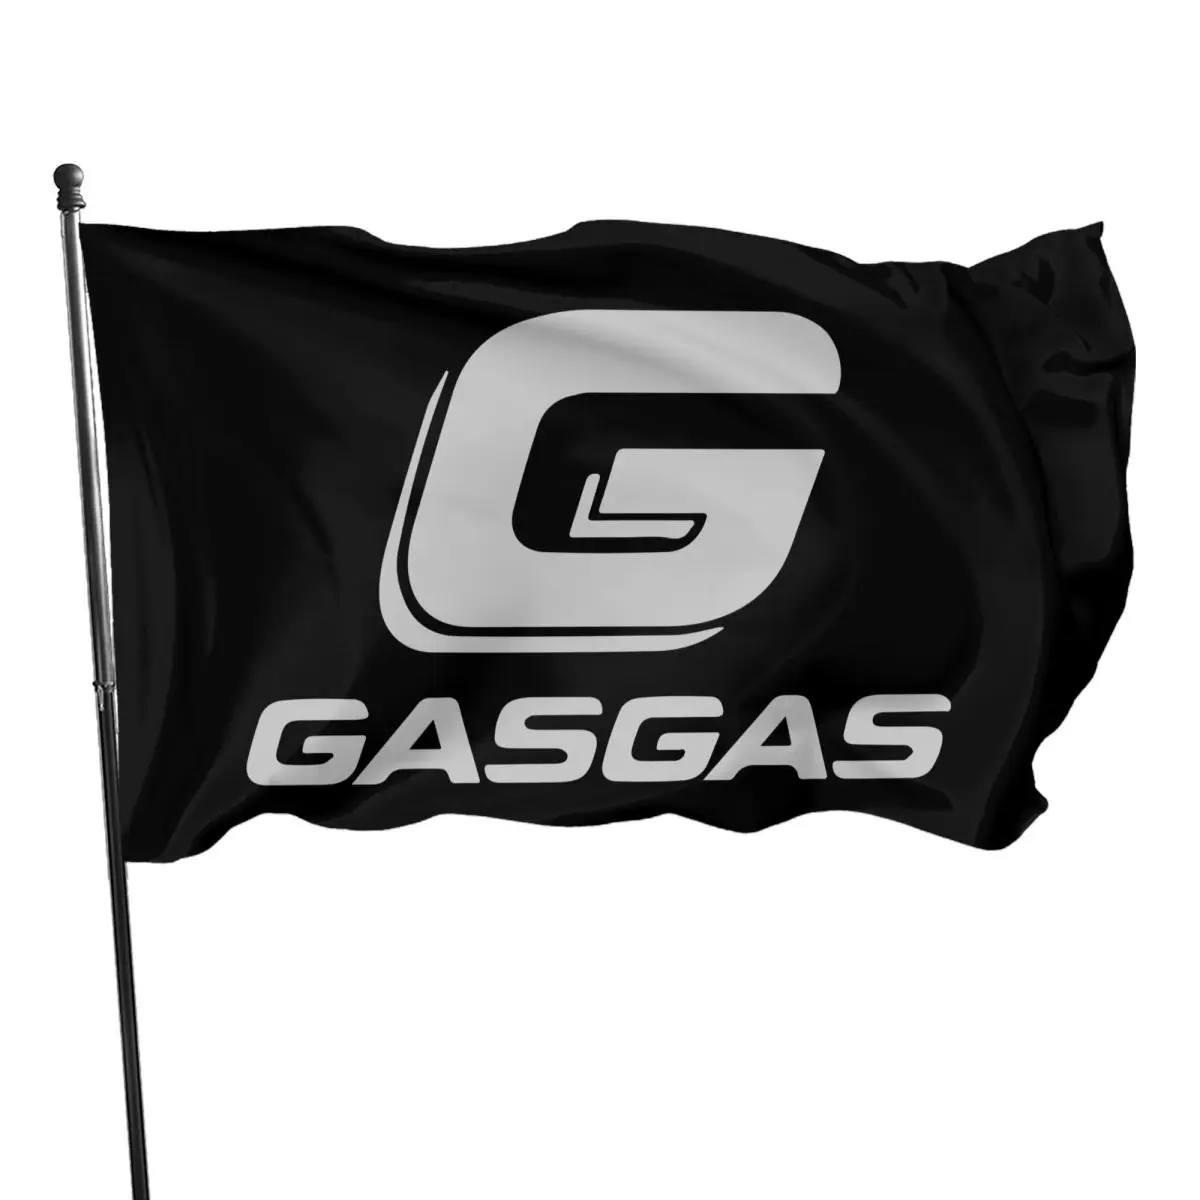 

Beta Gasgas Motorcycle Outdoor Banner Nautical flag Camp Flag Camping Background Cloth Competition sport Cheering flag Parade